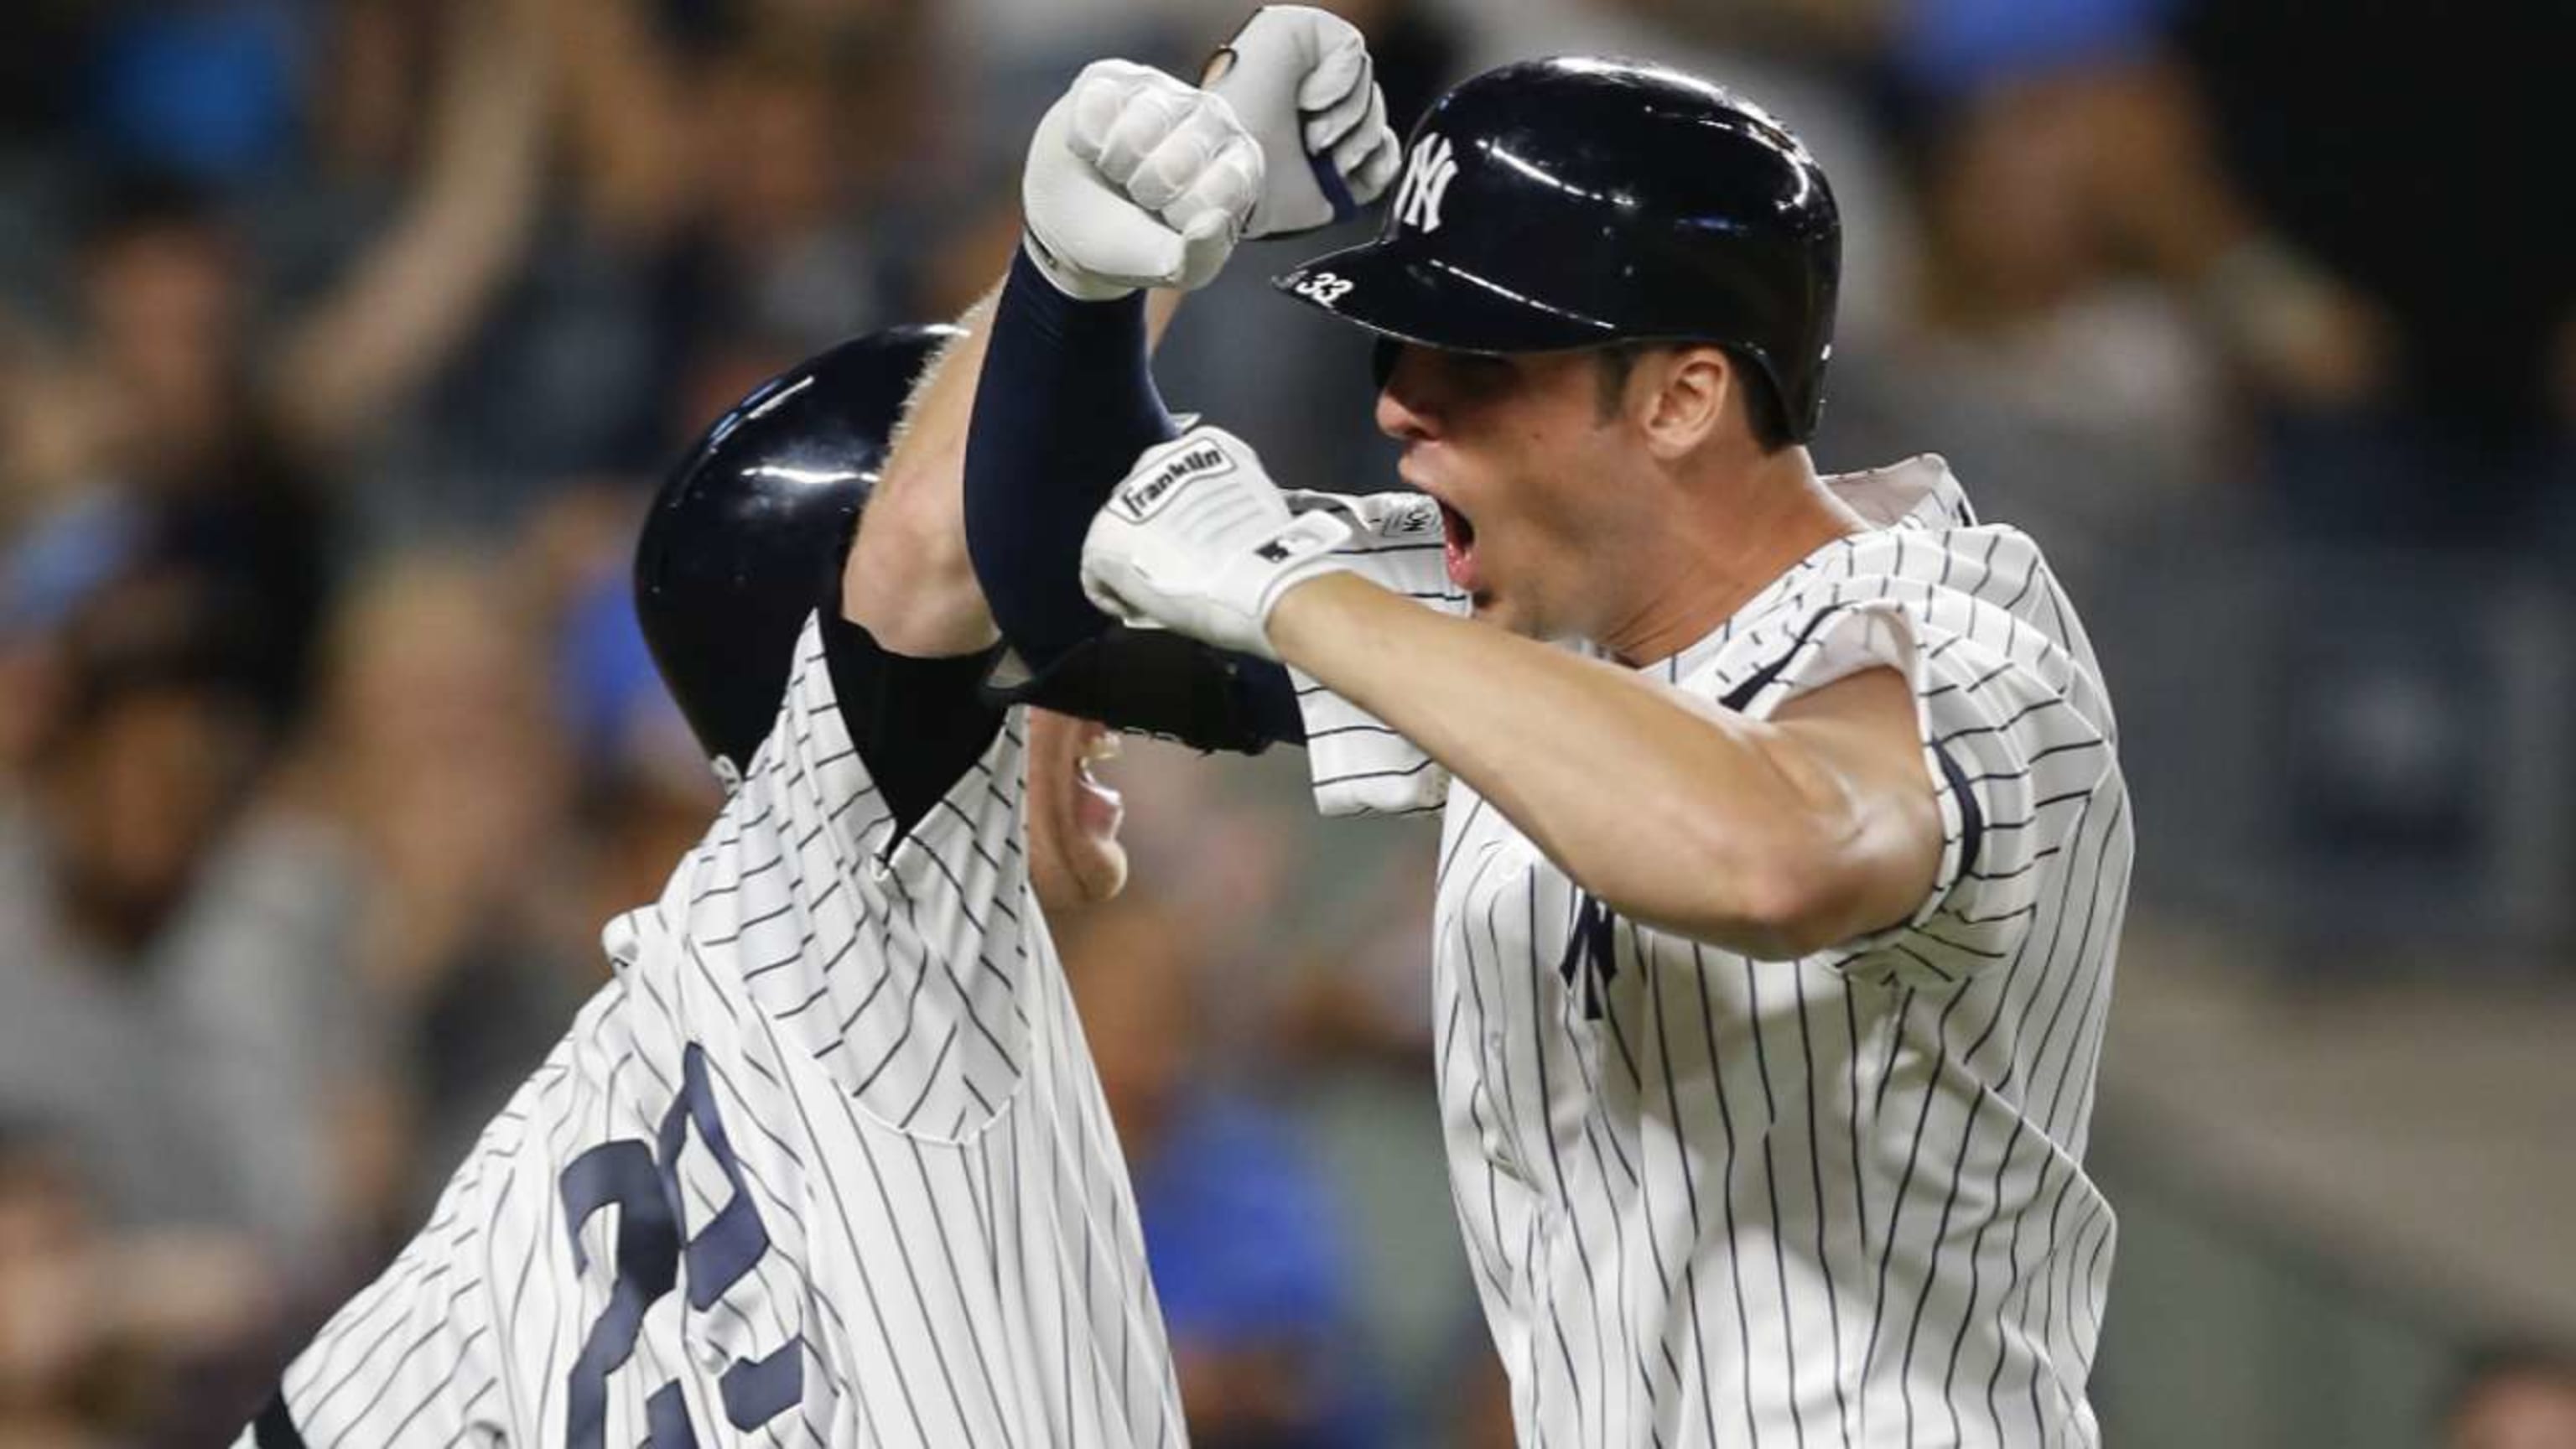 Greg Bird, Yankees agree to $1.2 million, 1-year contract